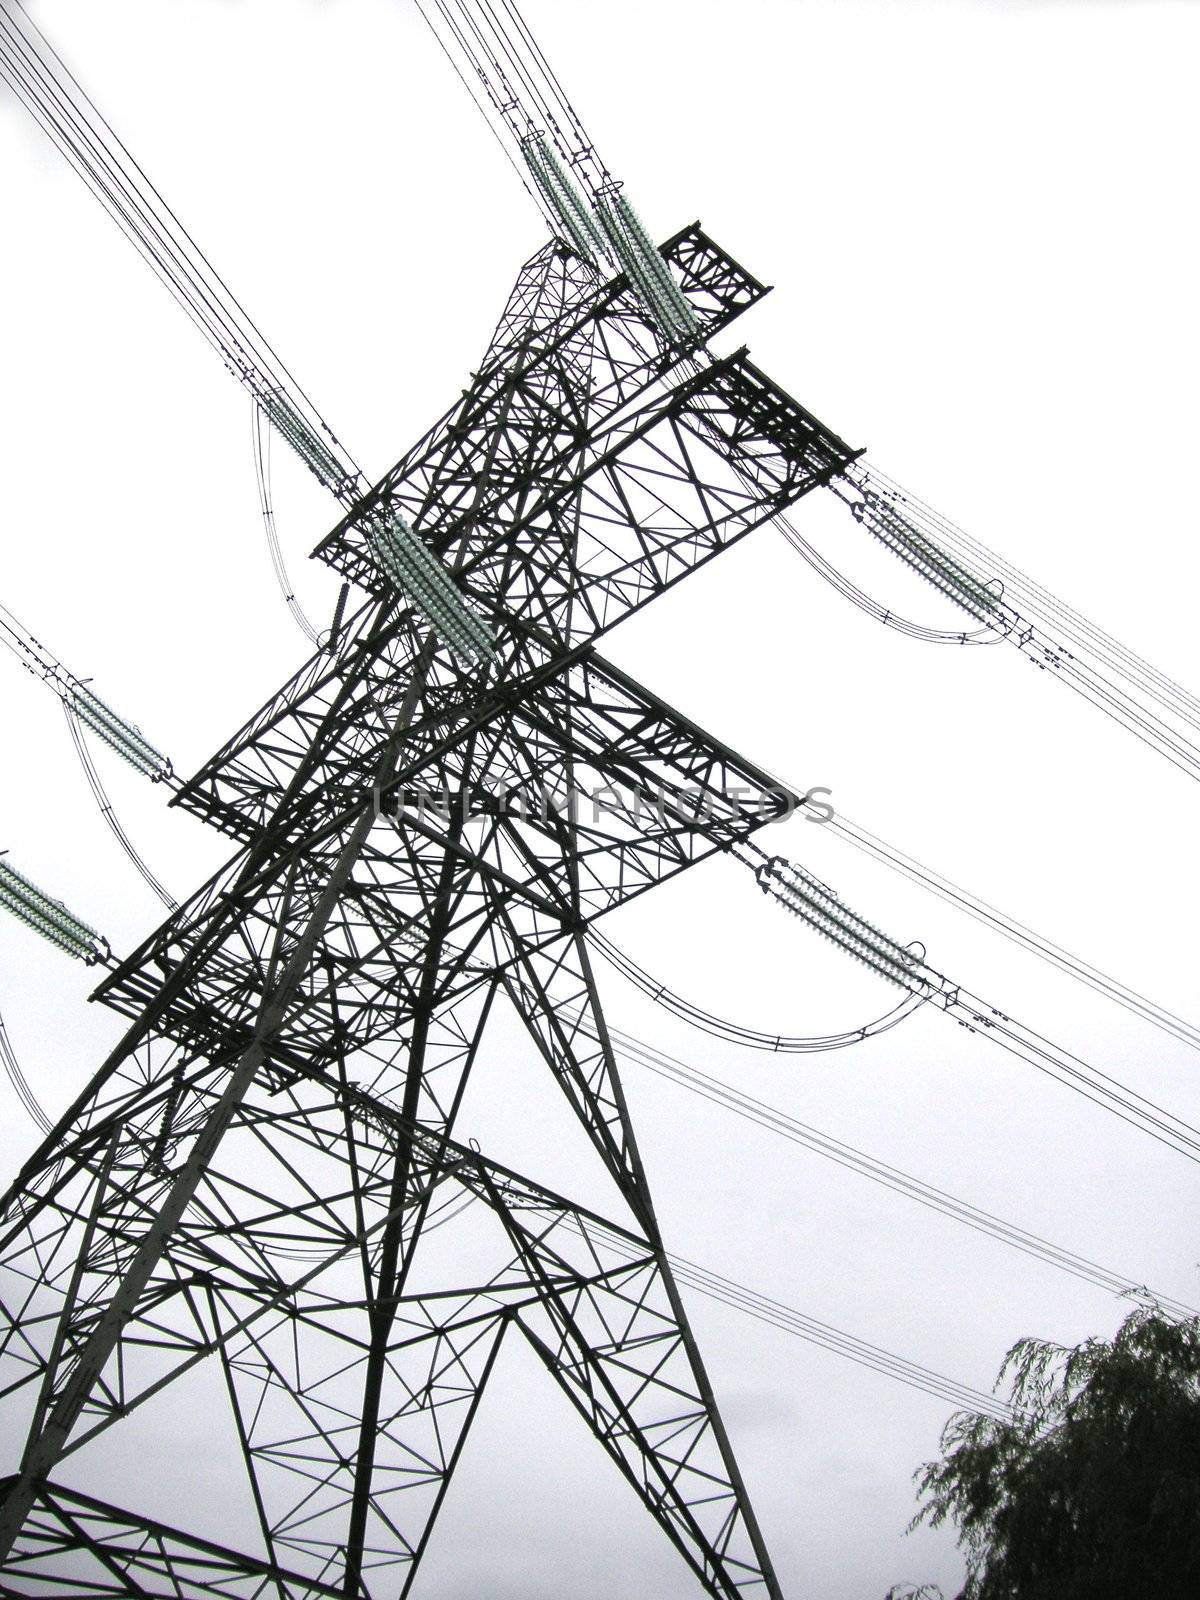 electricity pylon taken from an abstract angle